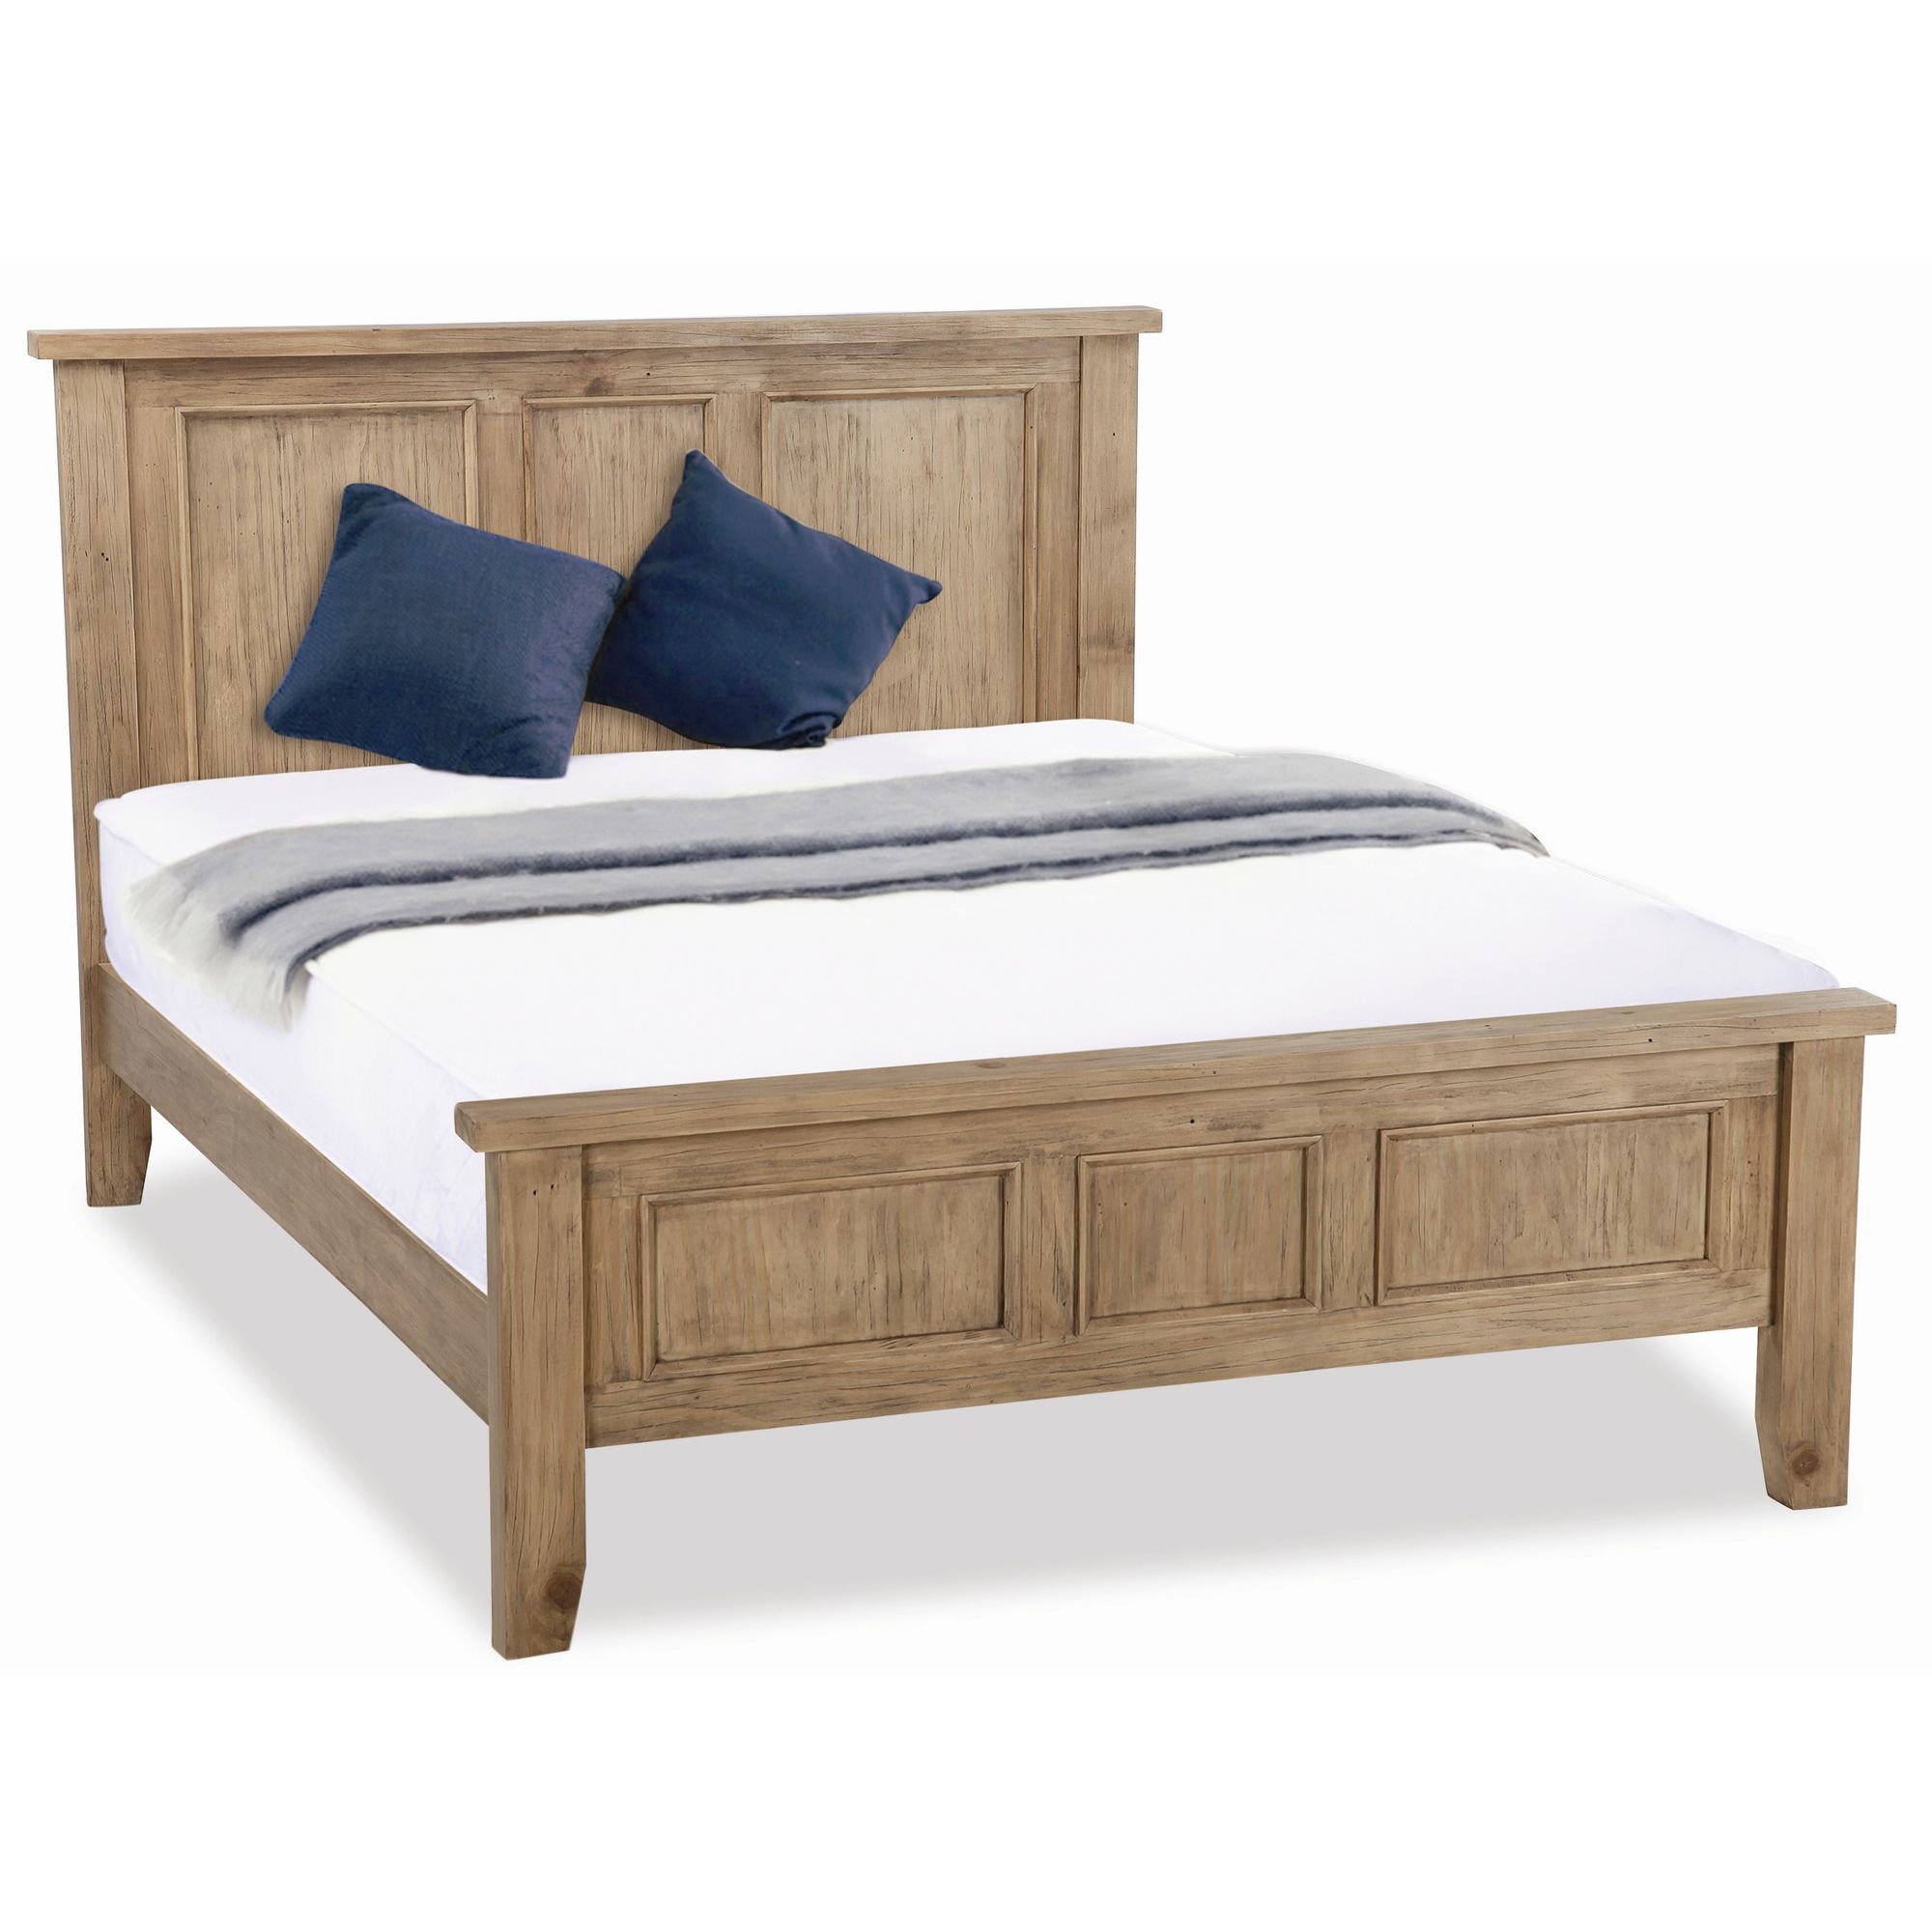 Alterton Furniture Naples Panel Bed - Double at Tesco Direct